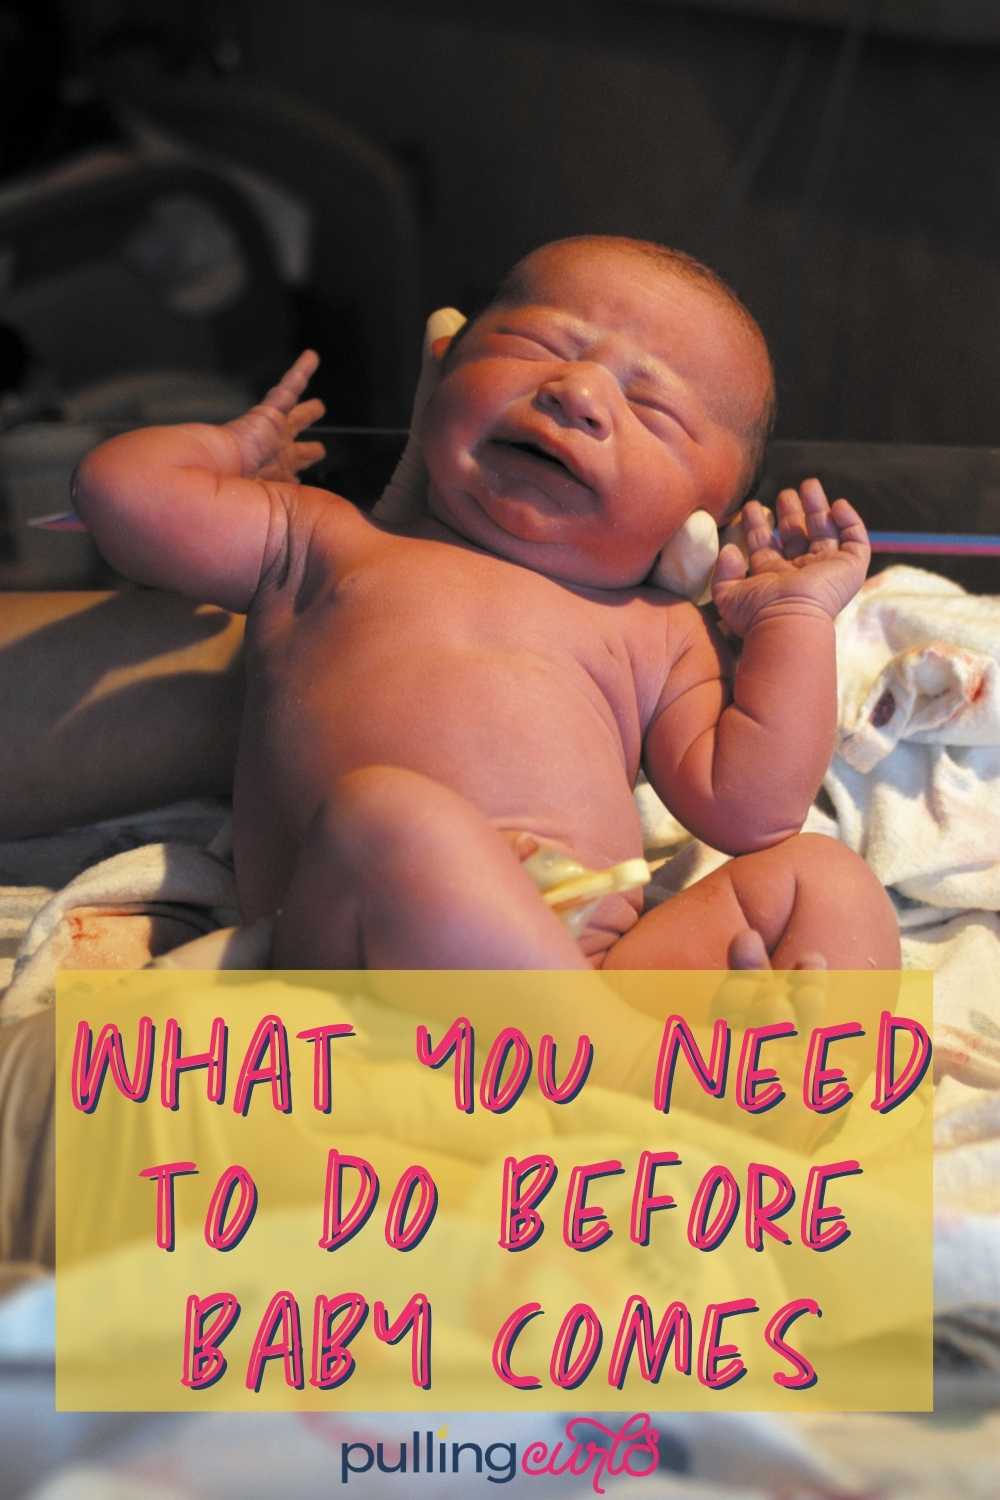 This checklist of important things to do before your new baby arrives will give you THE things a nurse thinks you need to do before hospital, delivery & the baby comes. It's a great way to make sure you're prepared. via @pullingcurls